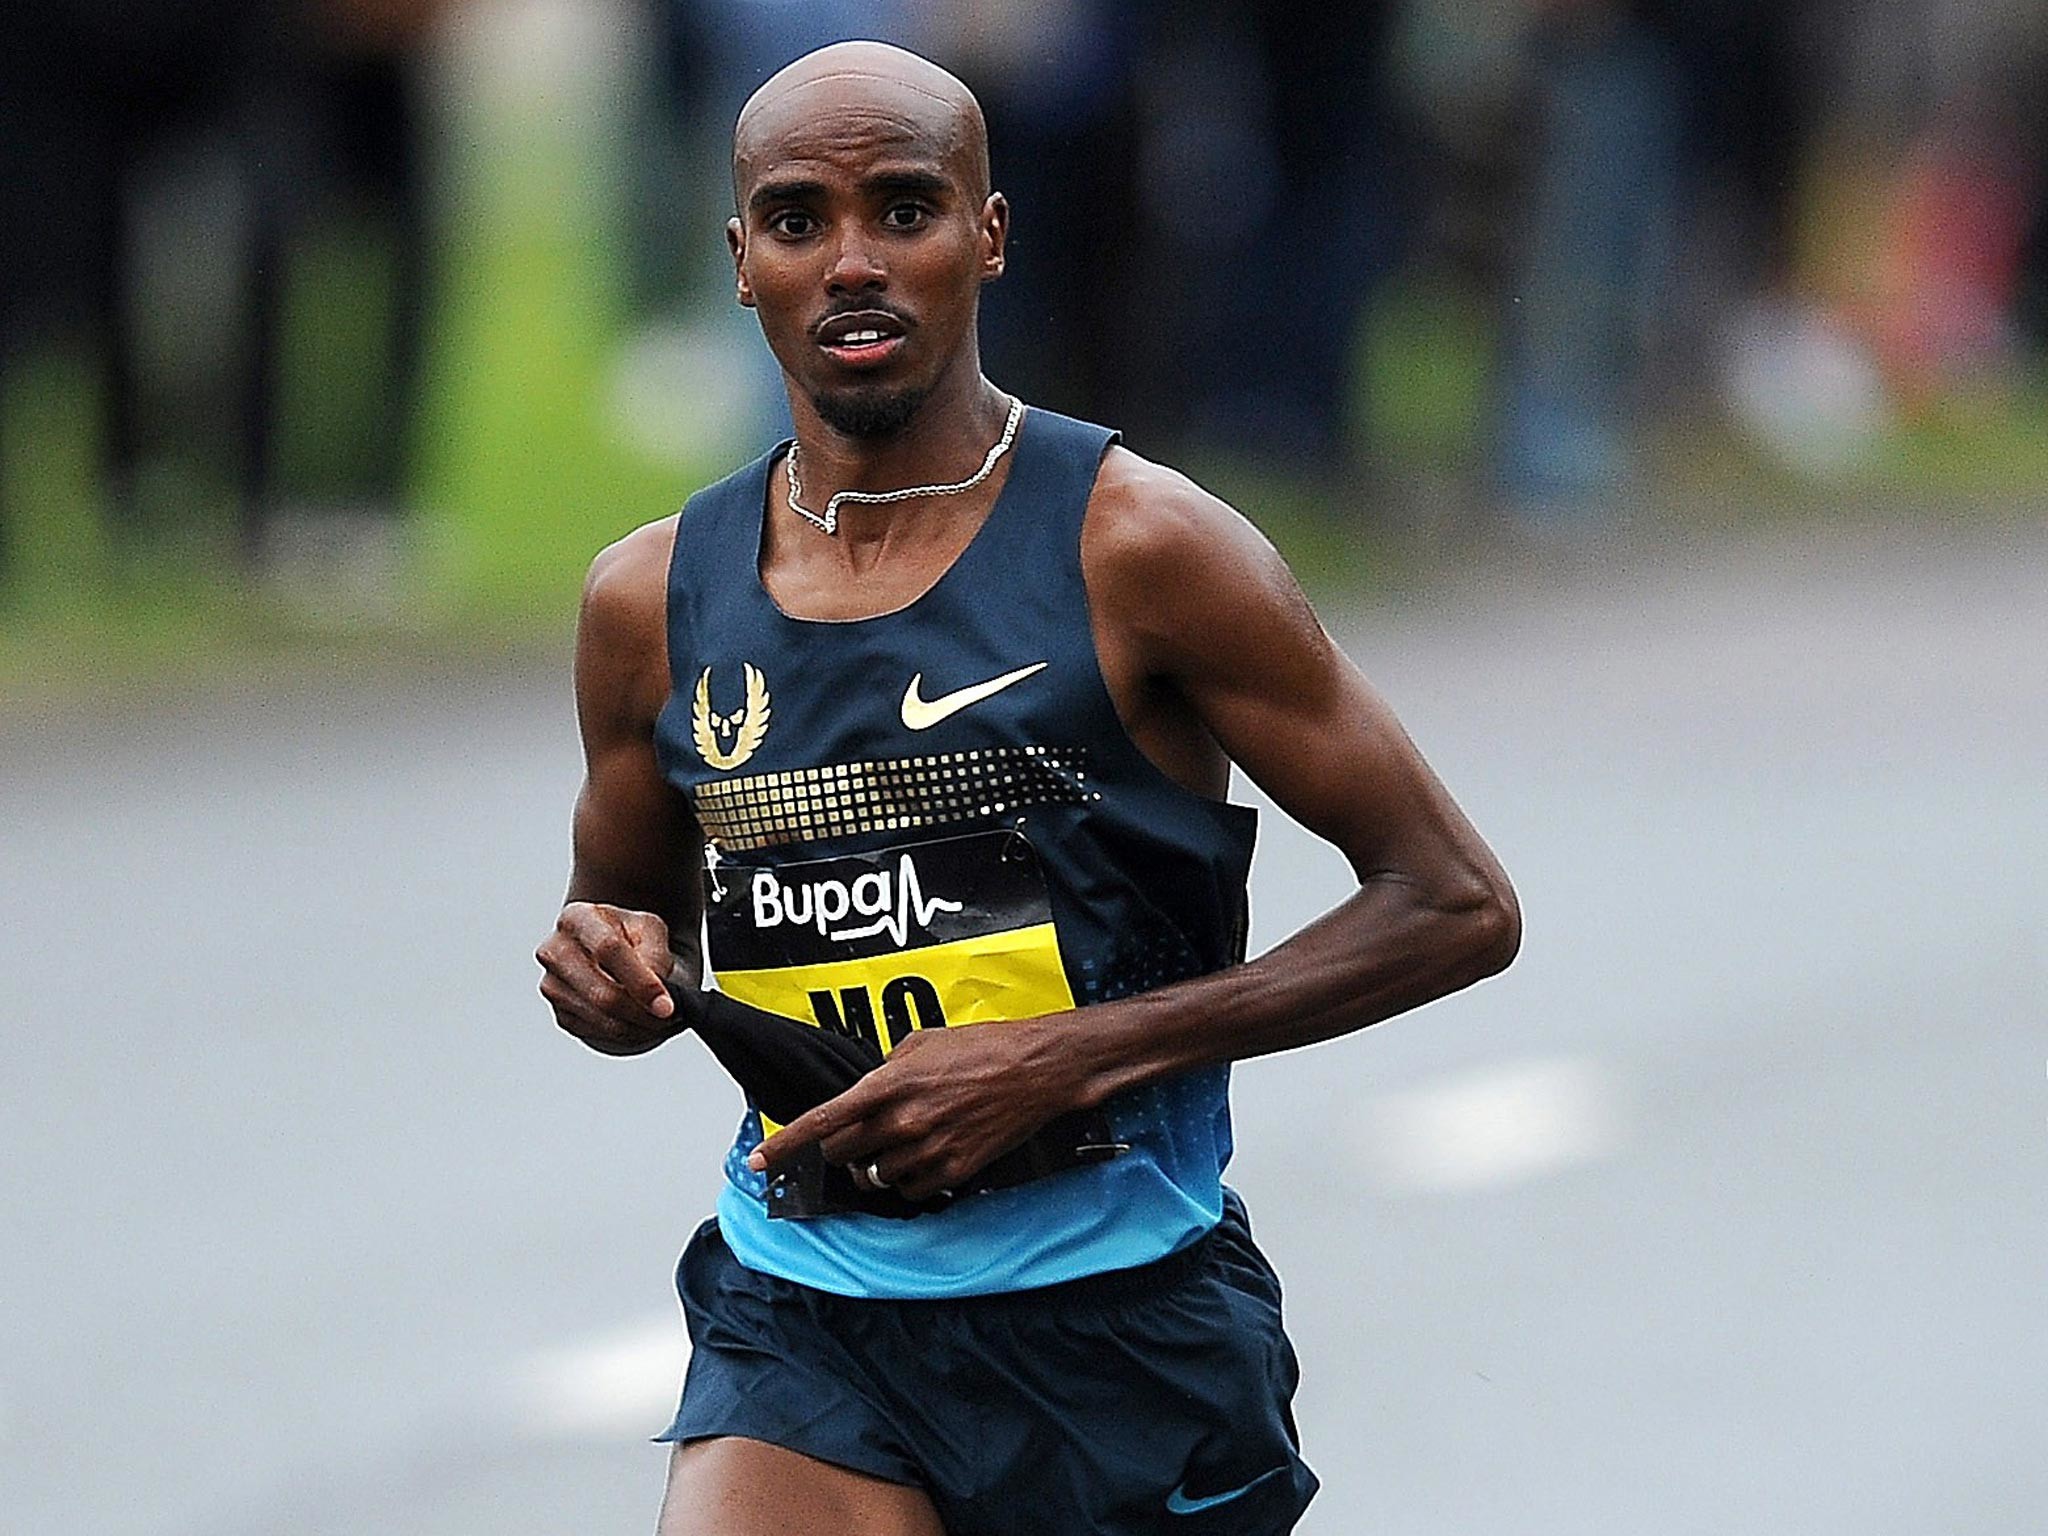 Mo Farah believes the Olympic Games will go ahead this summer and claims athletes have been told they will get Covid vaccines